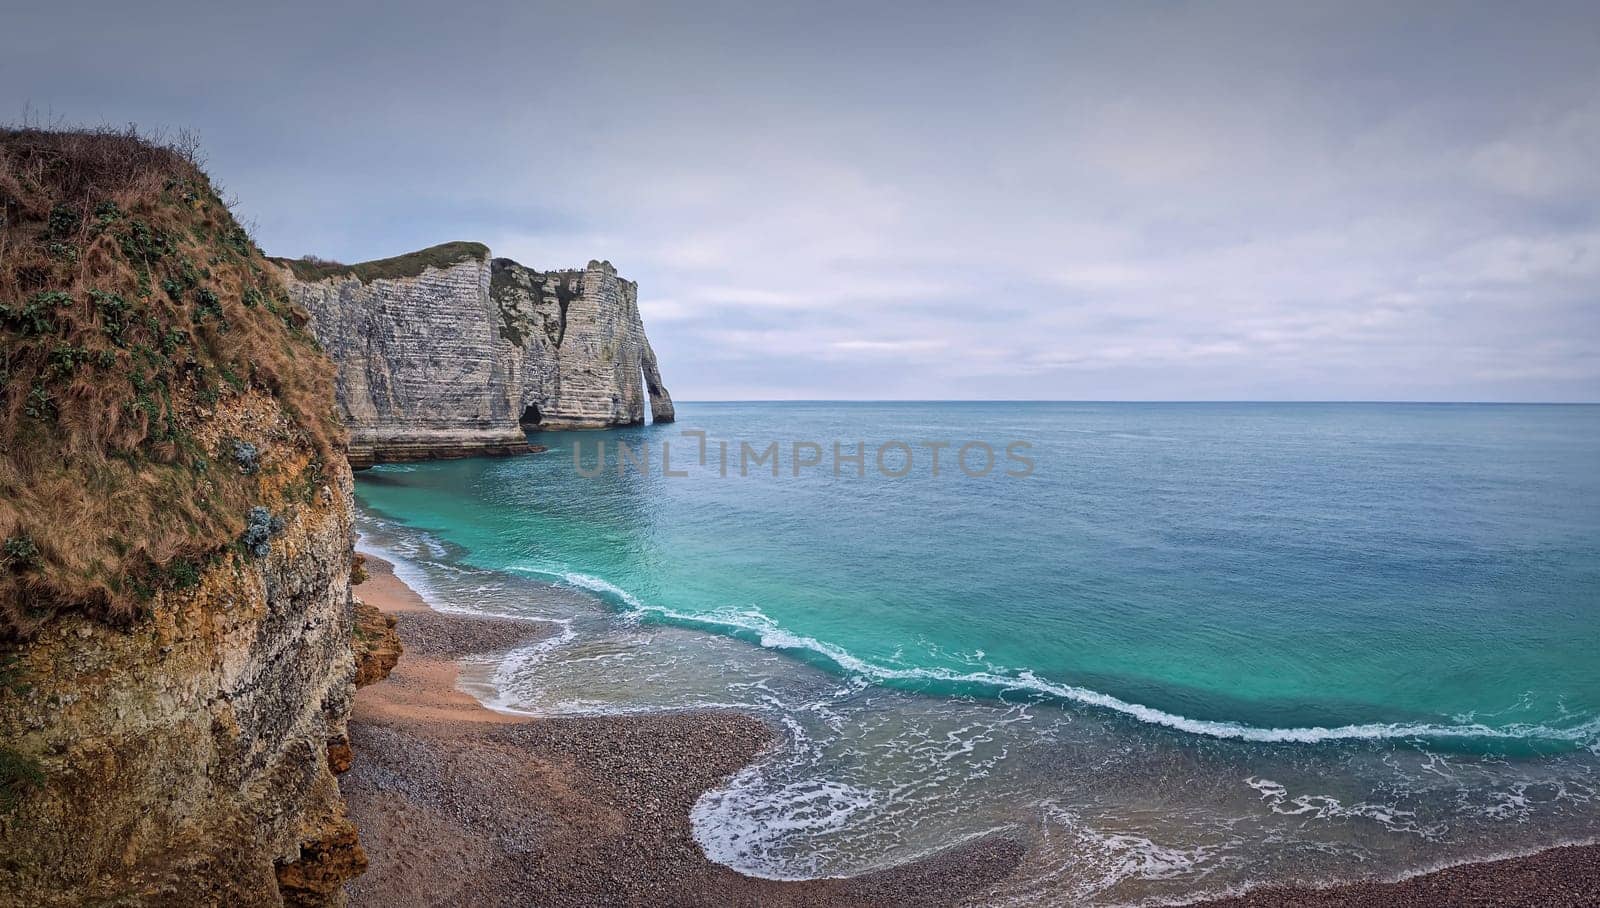 Sightseeing view to the wonderful cliffs of Etretat washed by the waves of the blue sea water, La Manche Channel. Famous Falaise d'Aval coastline in Normandy, France by psychoshadow